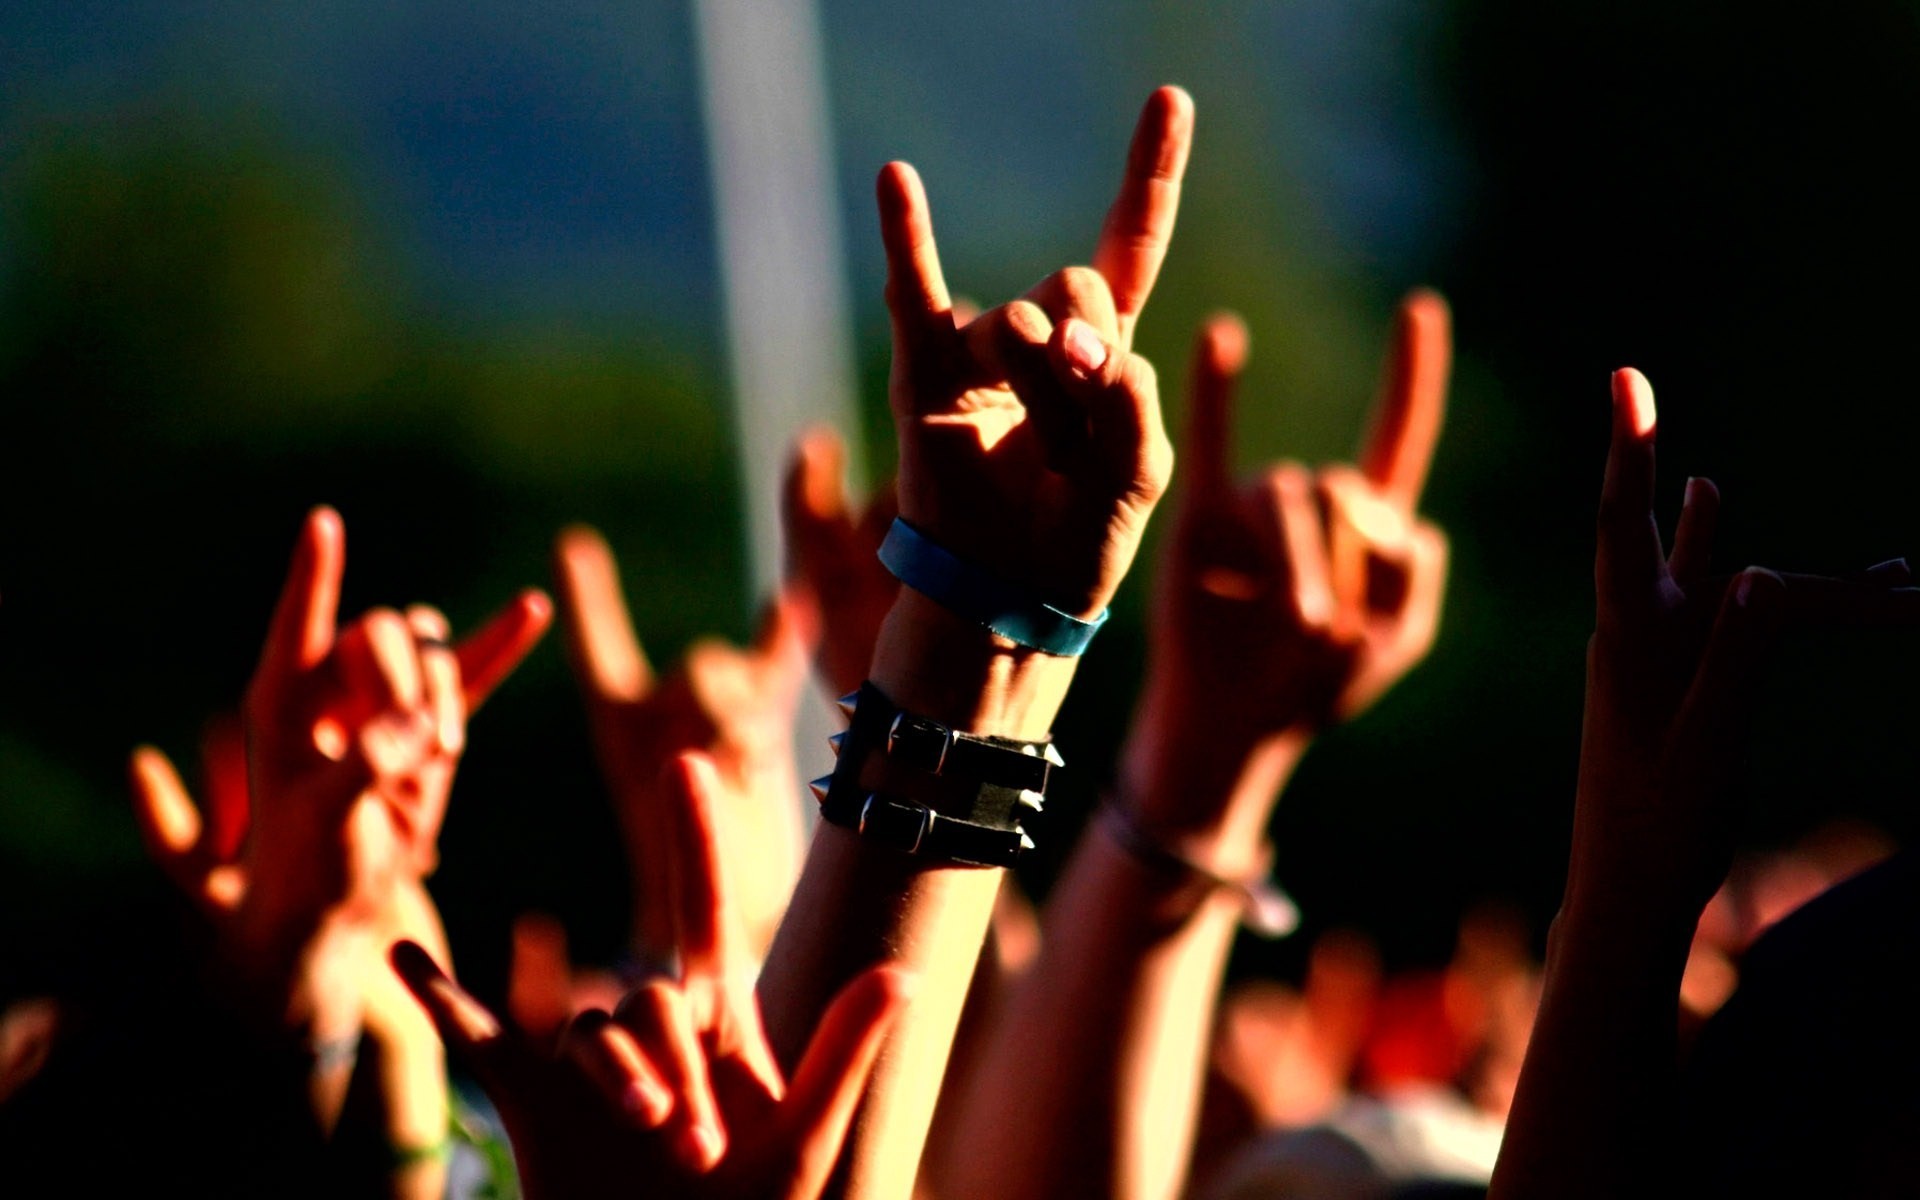 People 1920x1200 hands people heavy metal concerts hand gesture sunlight arms up finger pointing bracelets metal horns closeup